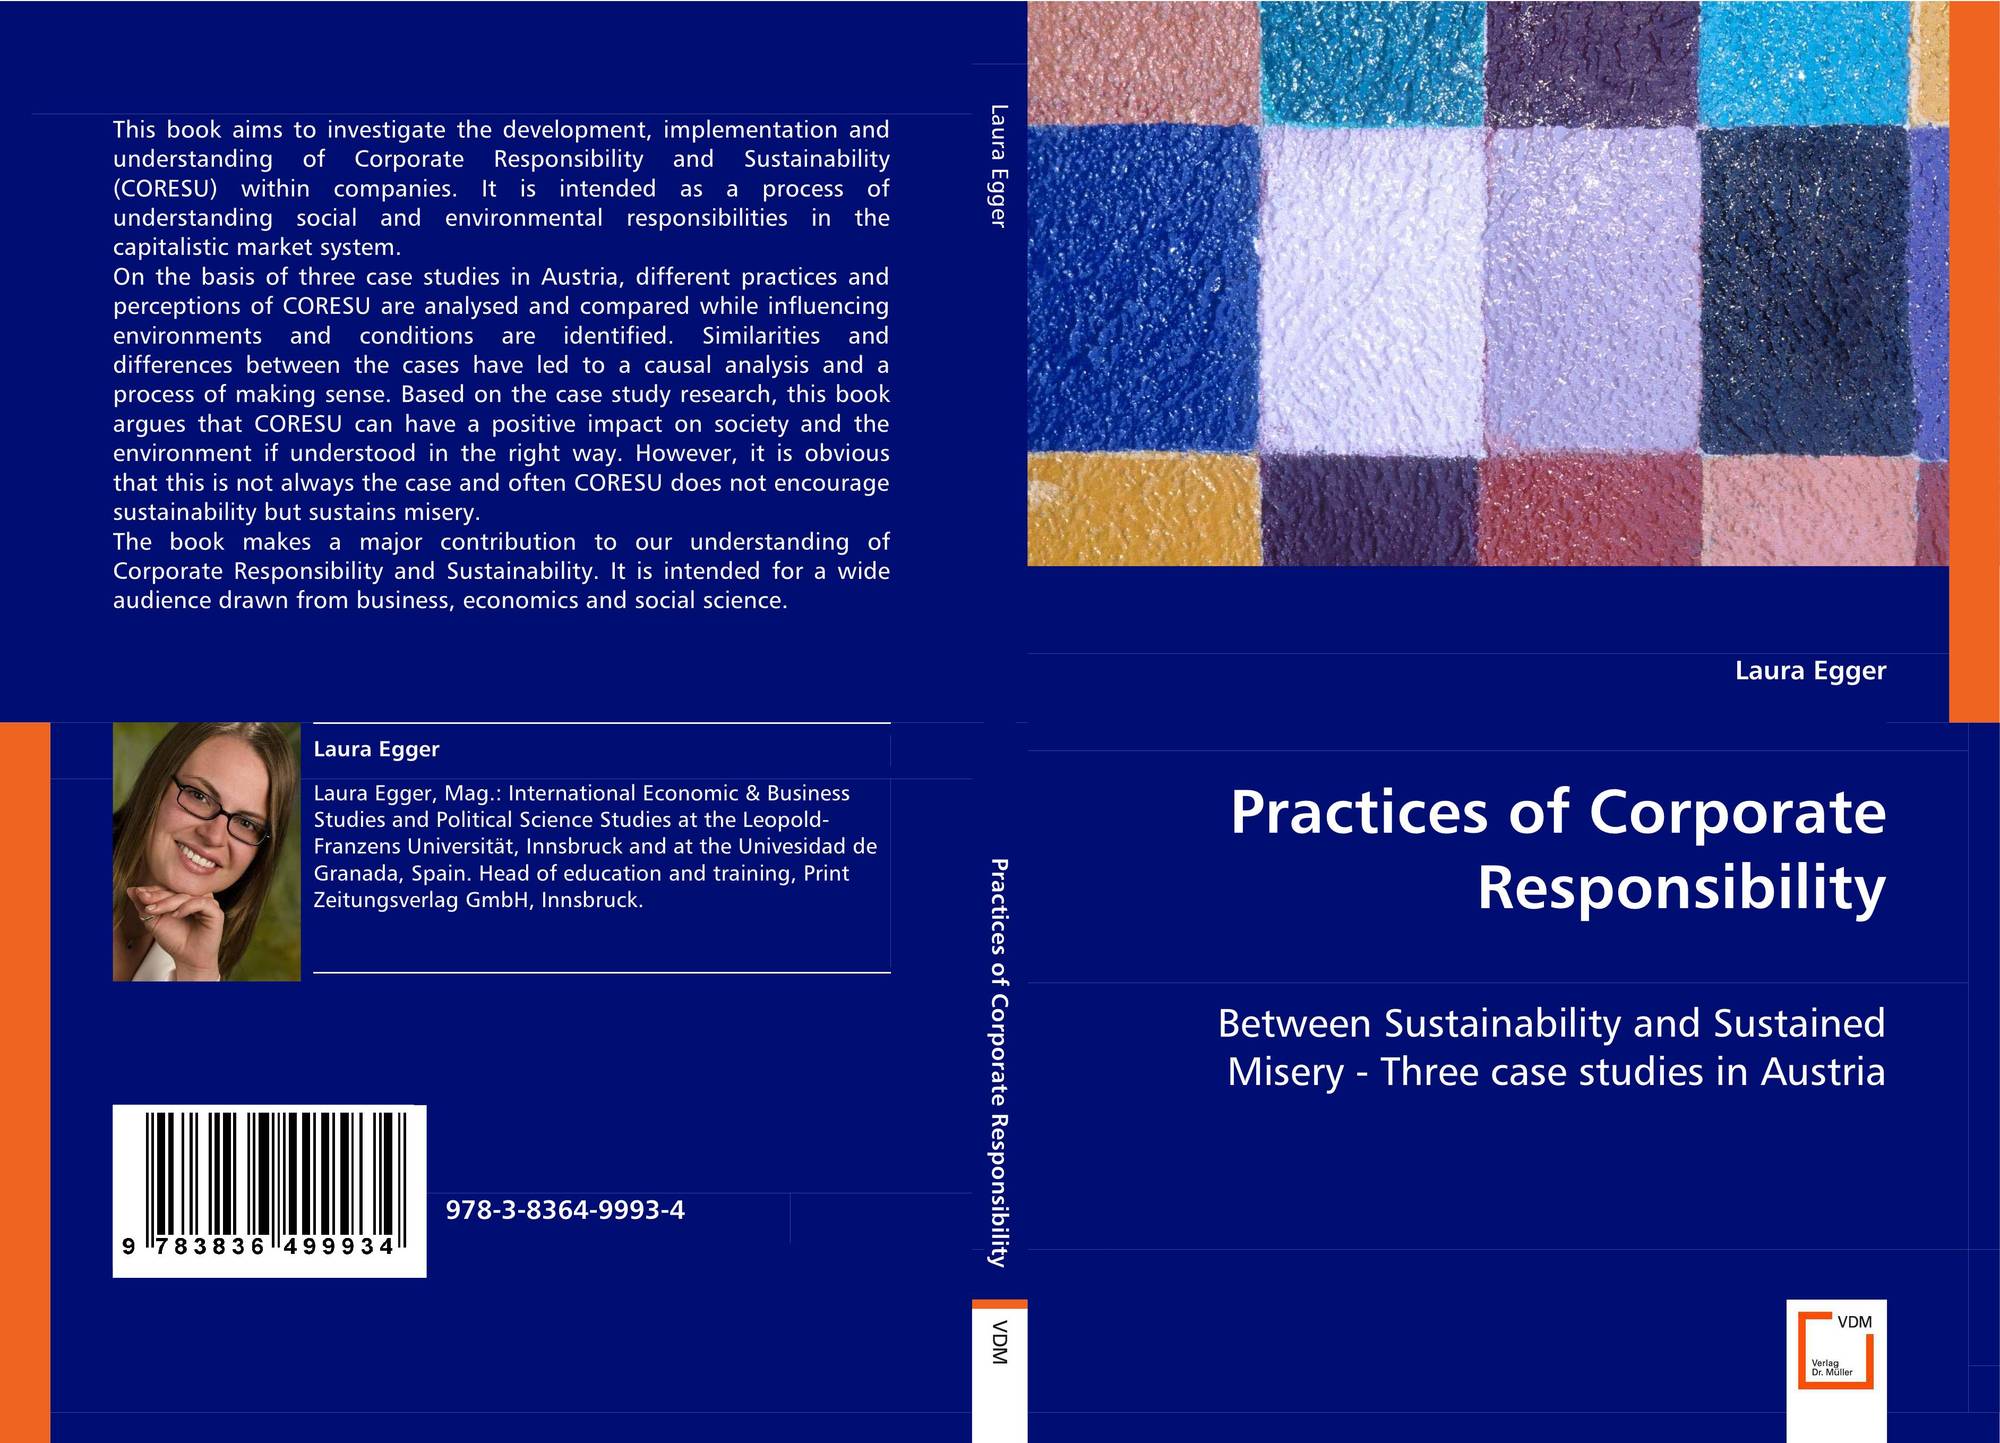 Practices Of Corporate Responsibility Between Sustainability And
Sustained Misery Three Case Studies In Austria